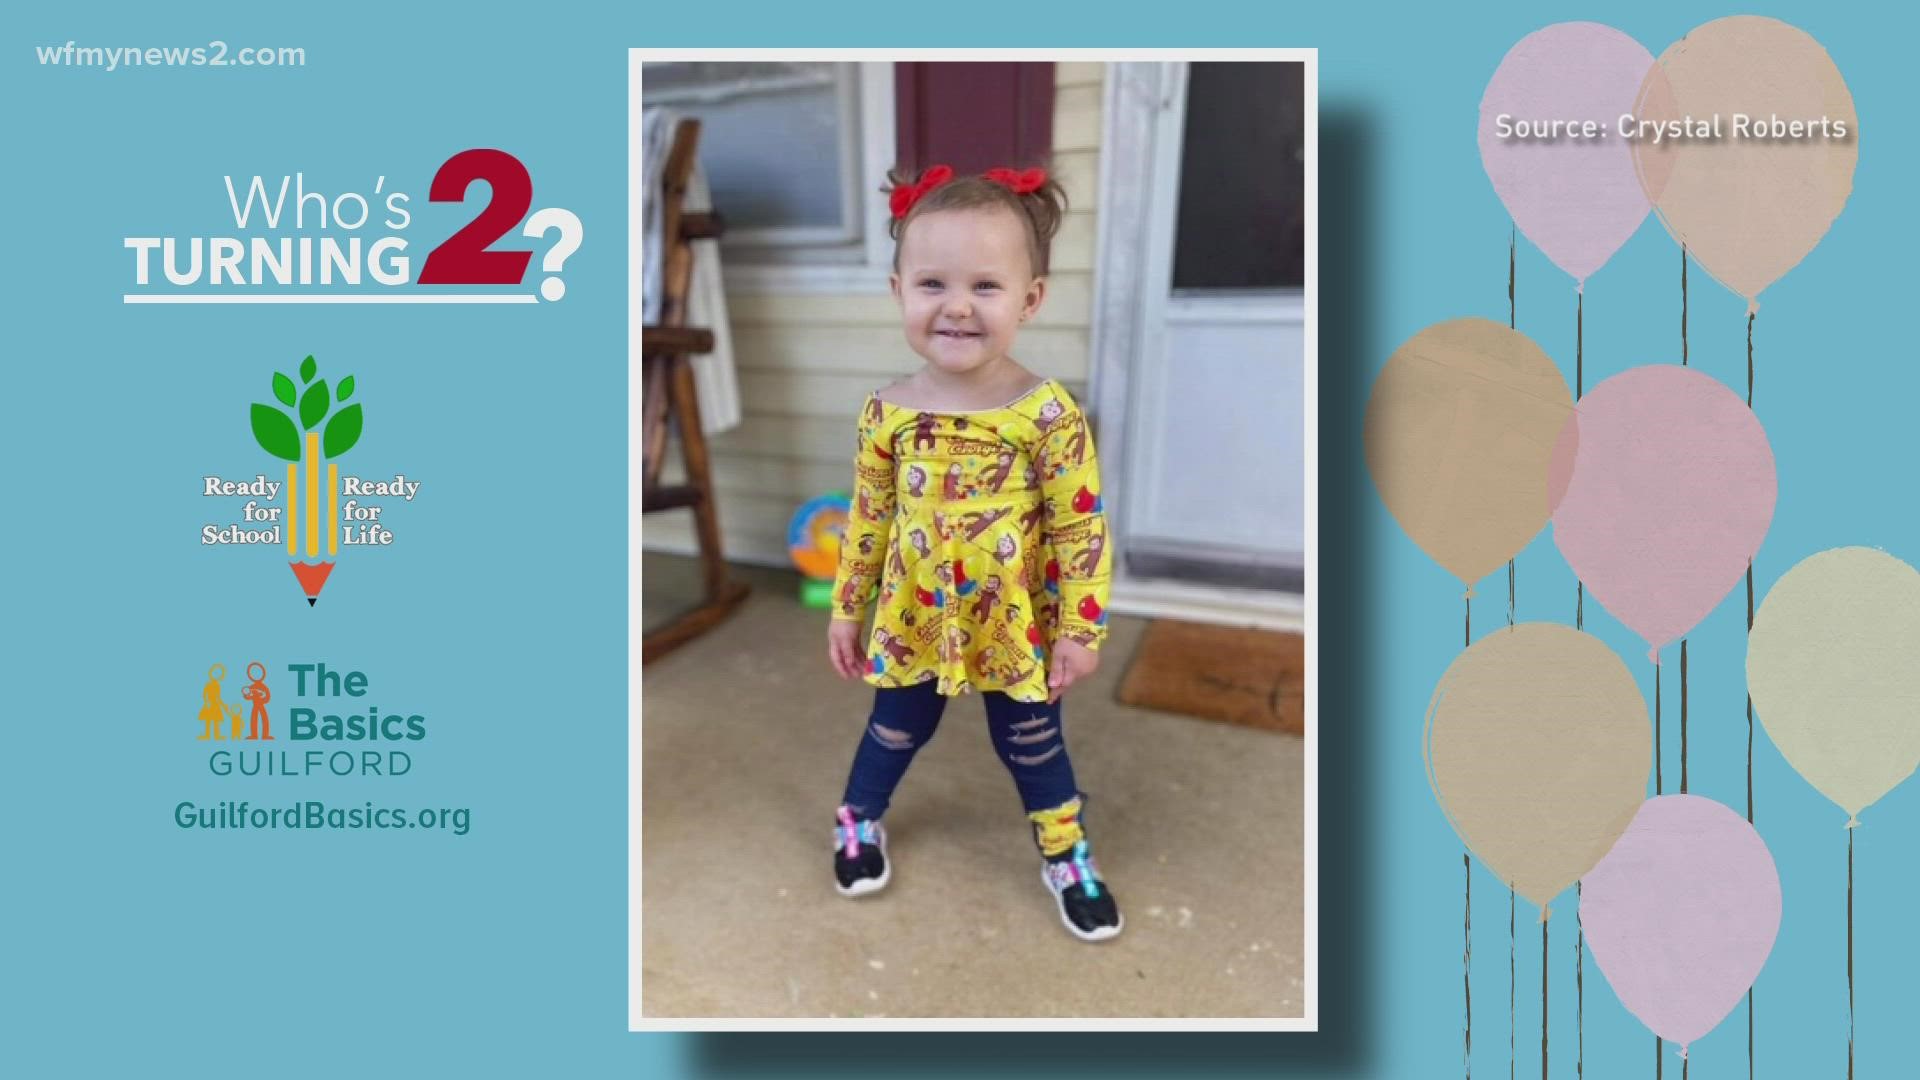 Let’s see which toddlers are celebrating birthday number 2!